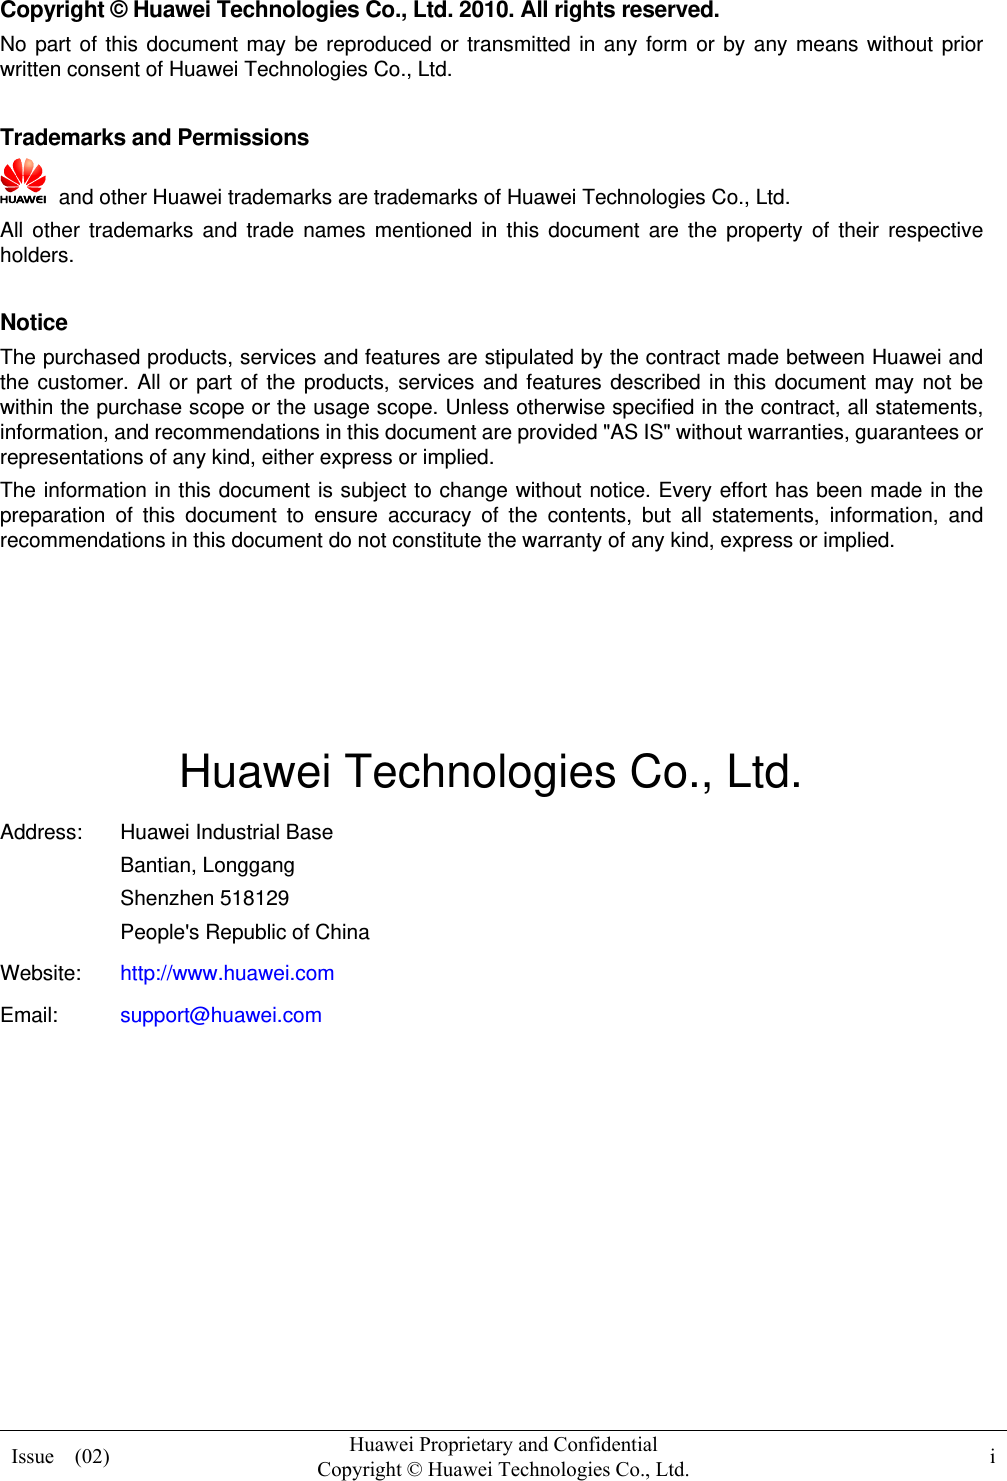  Issue  (02)  Huawei Proprietary and Confidential         Copyright © Huawei Technologies Co., Ltd. i  Copyright © Huawei Technologies Co., Ltd. 2010. All rights reserved. No part of this document may be reproduced or transmitted in any form or by any means without prior written consent of Huawei Technologies Co., Ltd.  Trademarks and Permissions   and other Huawei trademarks are trademarks of Huawei Technologies Co., Ltd. All other trademarks and trade names mentioned in this document are the property of their respective holders.  Notice The purchased products, services and features are stipulated by the contract made between Huawei and the customer. All or part of the products, services and features described in this document may not be within the purchase scope or the usage scope. Unless otherwise specified in the contract, all statements, information, and recommendations in this document are provided &quot;AS IS&quot; without warranties, guarantees or representations of any kind, either express or implied. The information in this document is subject to change without notice. Every effort has been made in the preparation of this document to ensure accuracy of the contents, but all statements, information, and recommendations in this document do not constitute the warranty of any kind, express or implied.     Huawei Technologies Co., Ltd. Address:  Huawei Industrial Base Bantian, Longgang Shenzhen 518129 People&apos;s Republic of China Website:  http://www.huawei.com Email:  support@huawei.com          